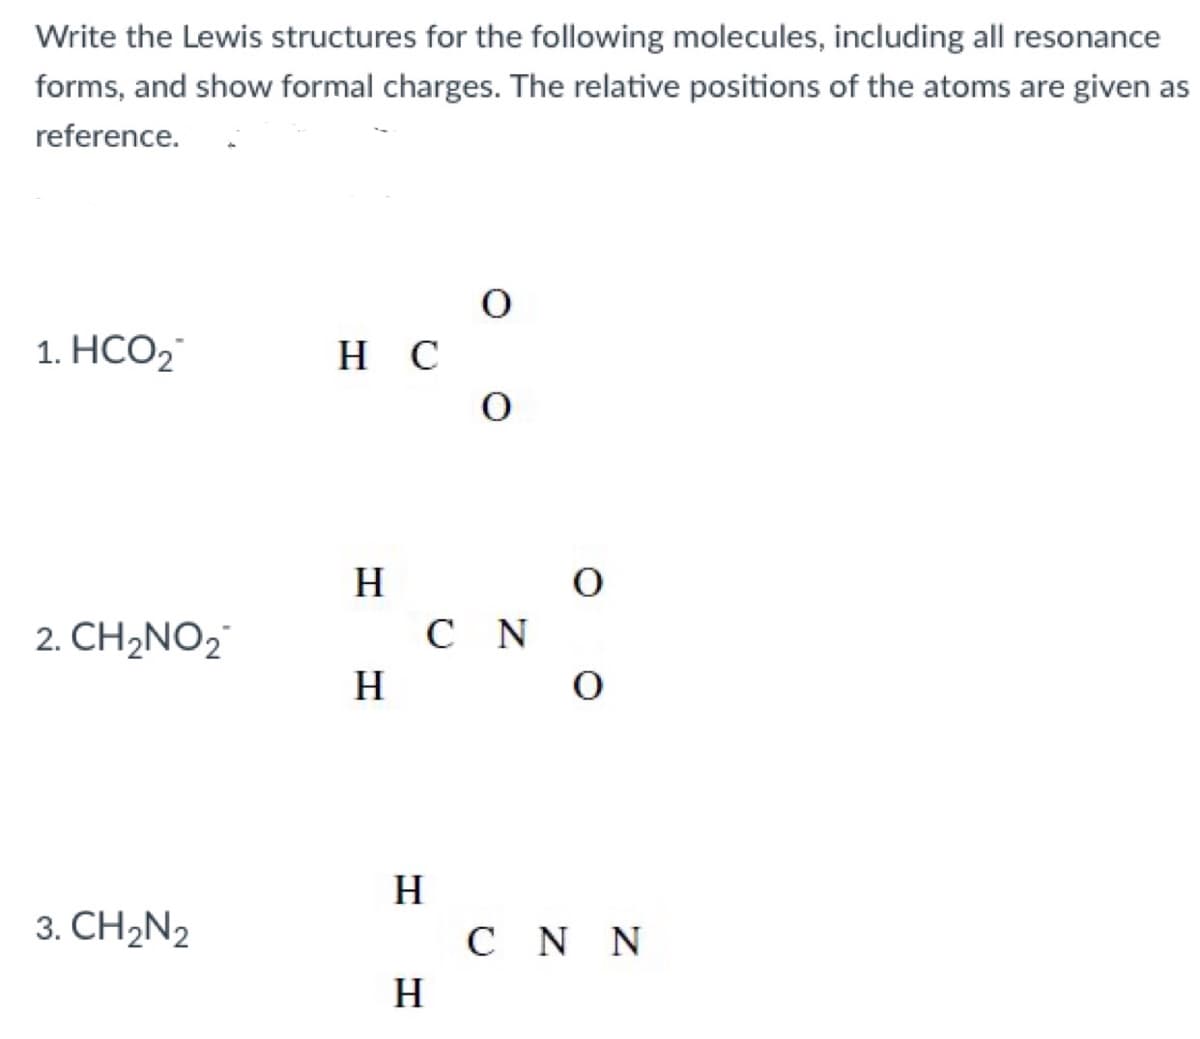 Write the Lewis structures for the following molecules, including all resonance
forms, and show formal charges. The relative positions of the atoms are given as
reference.
1. НСО2
H C
H
2. CH2NO2
C N
H
H
3. CH2N2
C N N
H.
